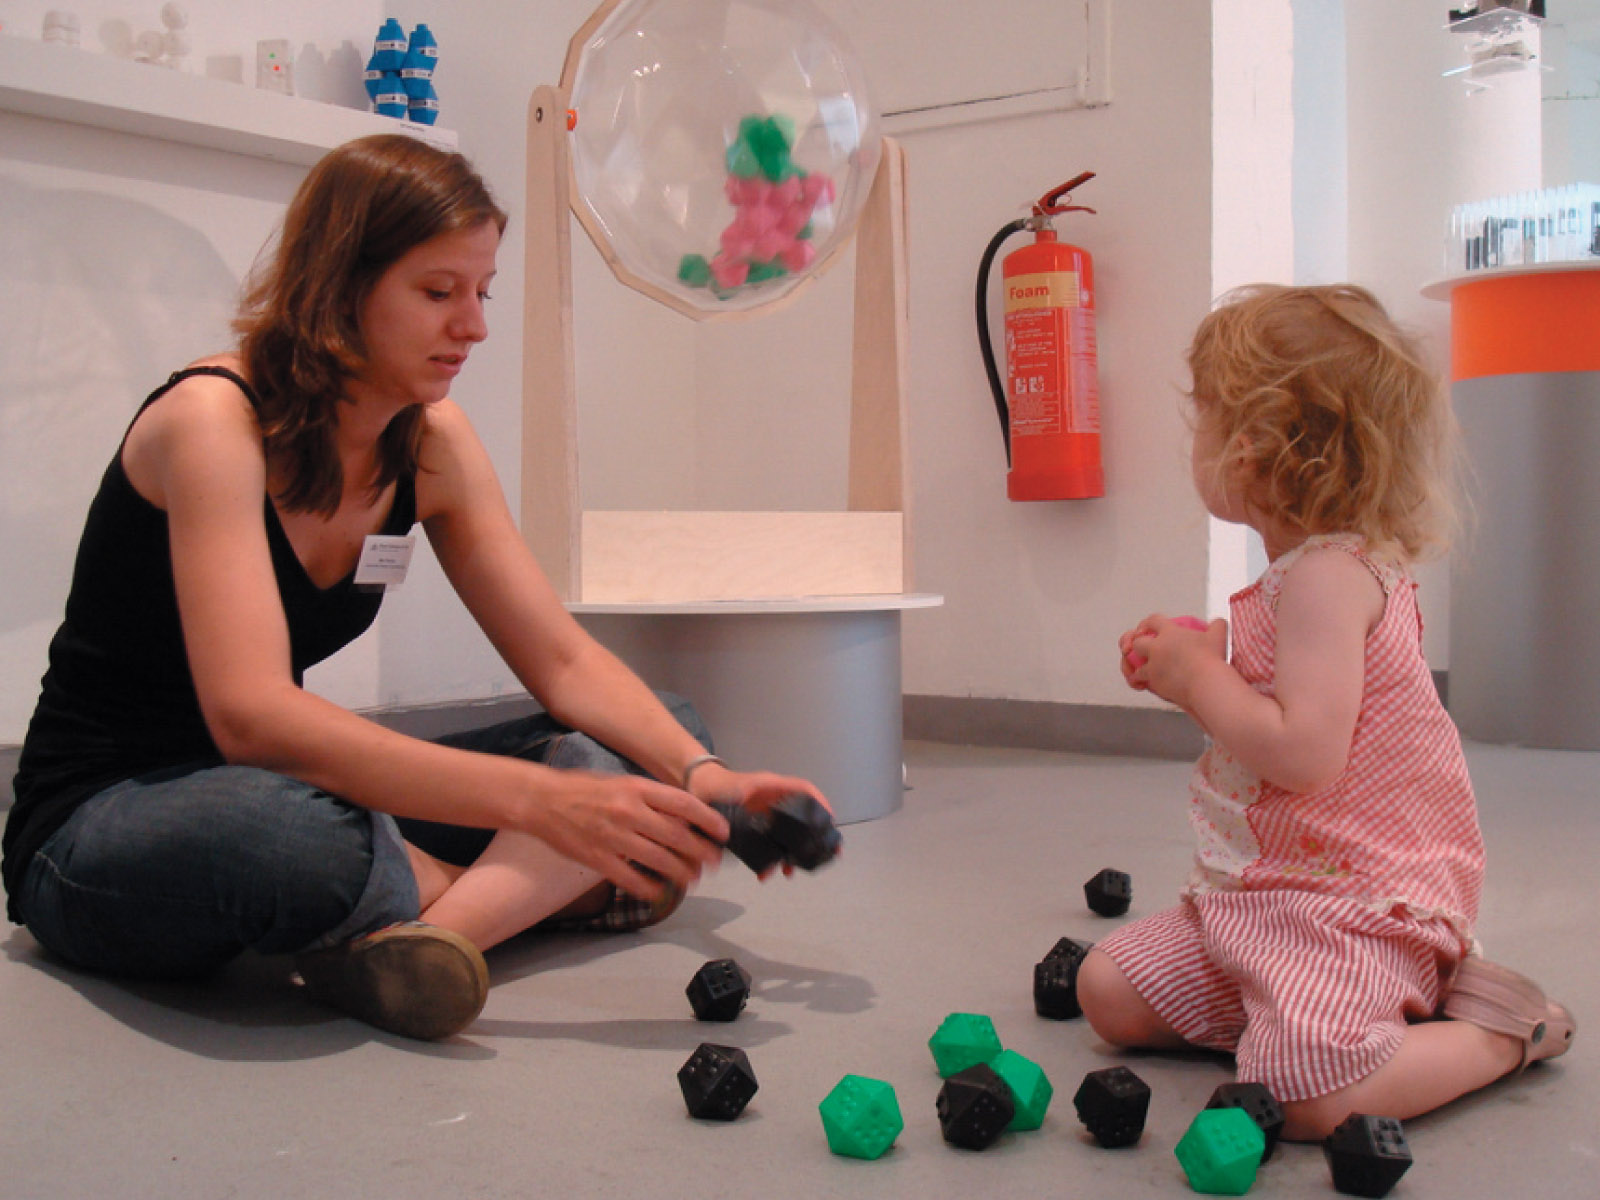 A little girl playing with the self-organising objects in front of the Entropy Machine